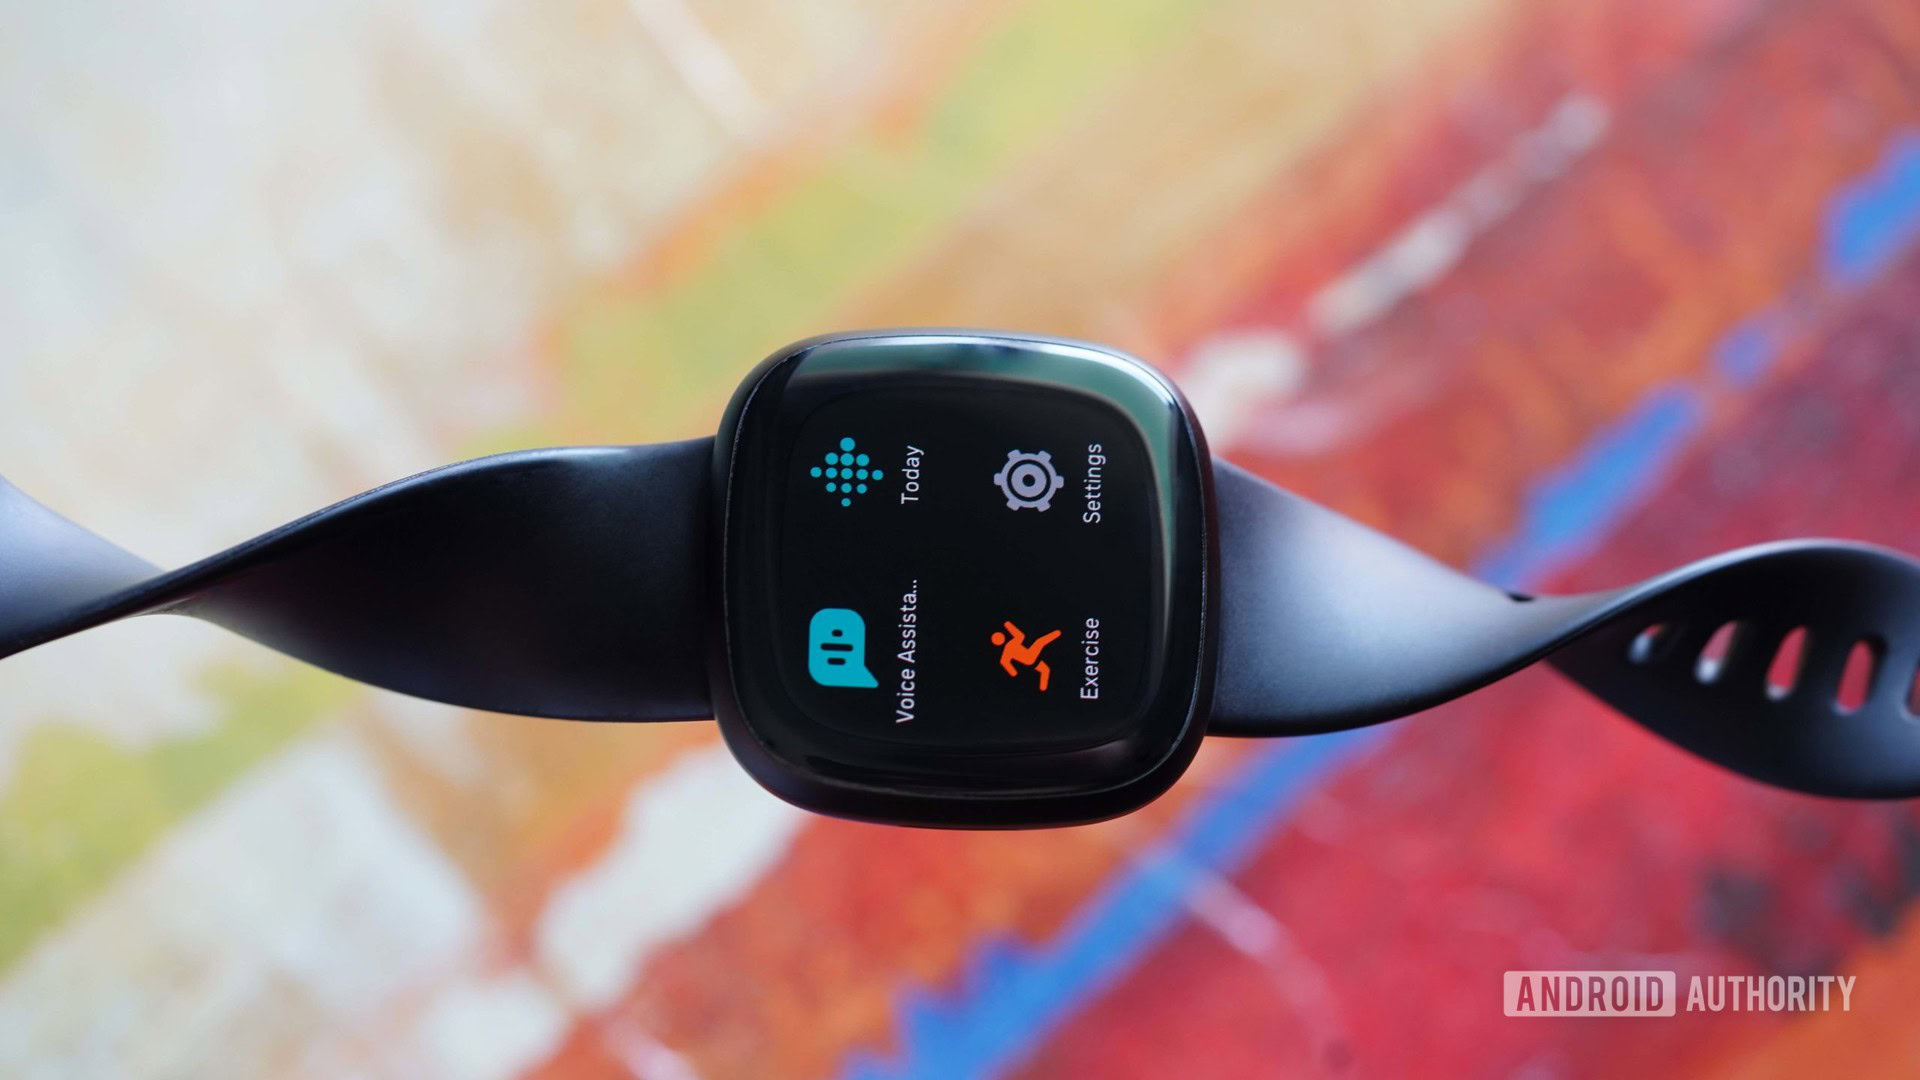 The Fitbit Versa 3 rests on an abstract, colorful background.